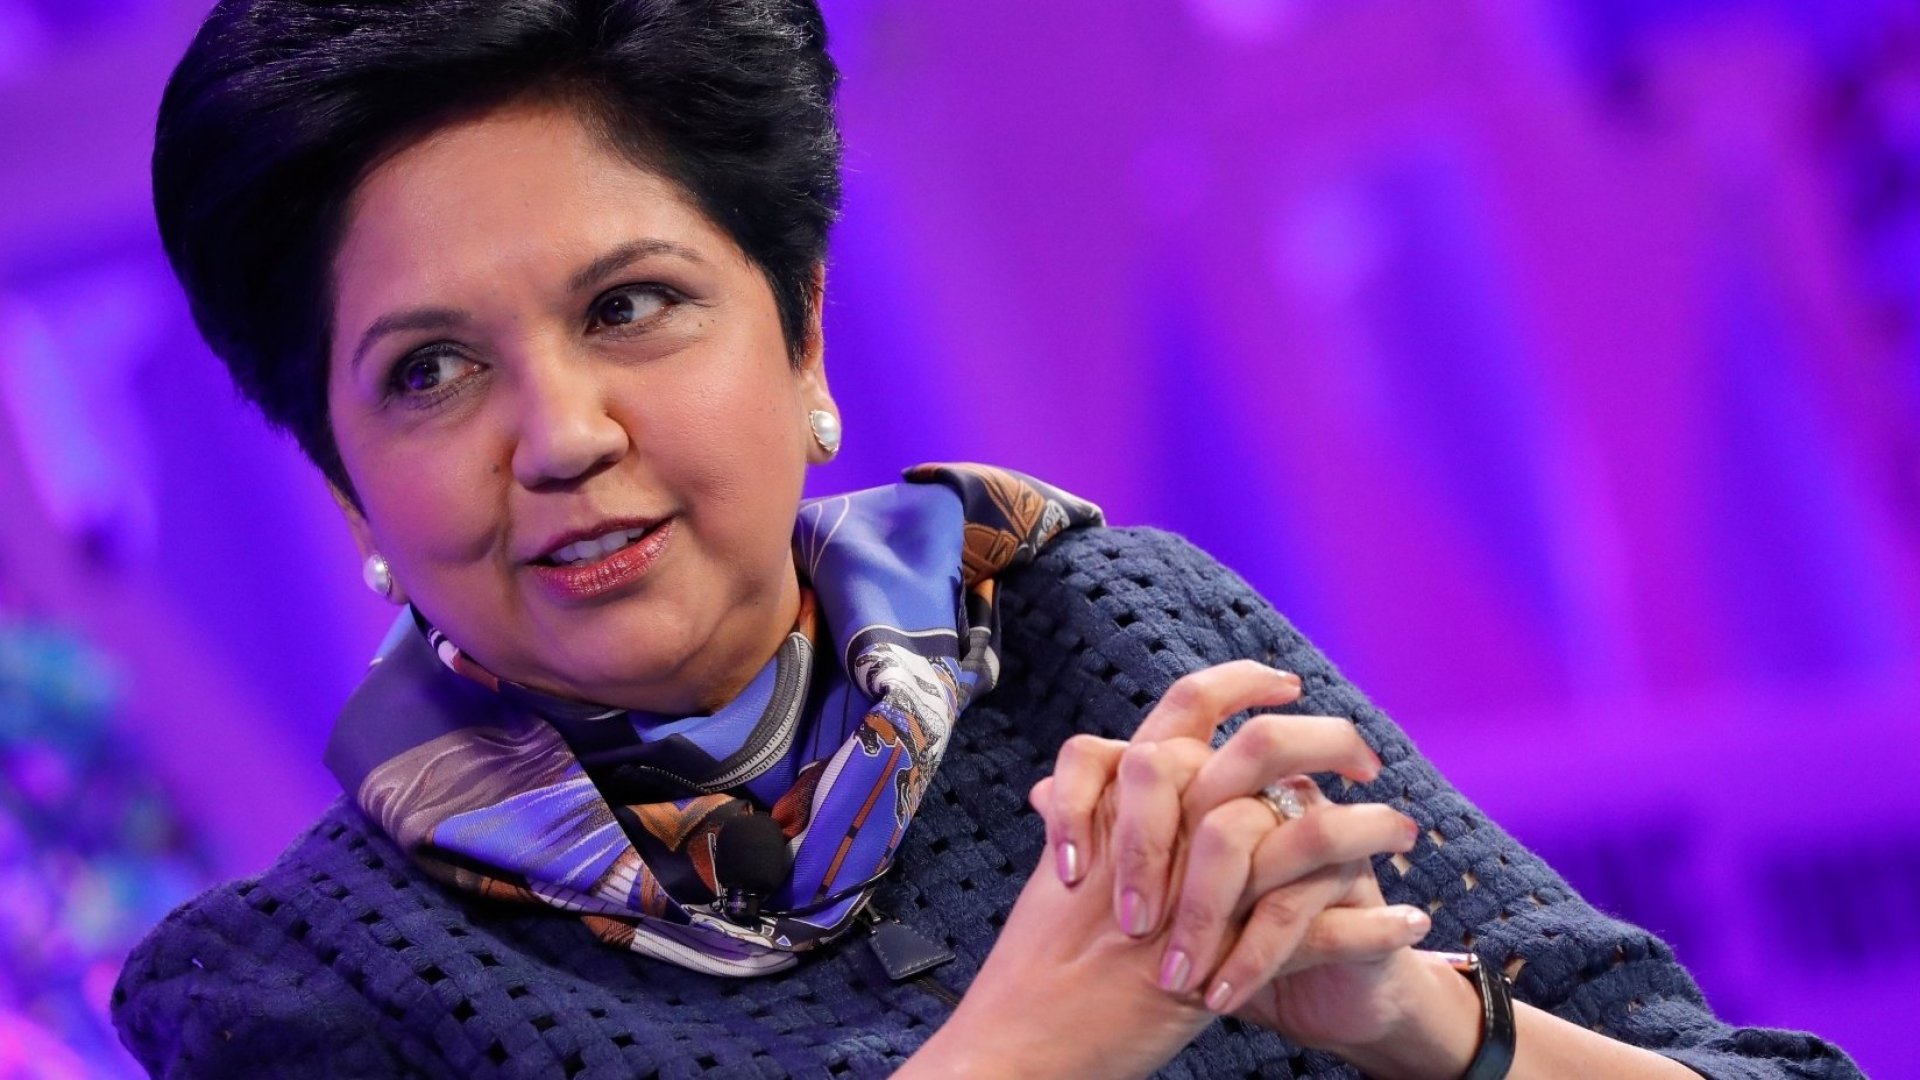 Outgoing PepsiCo CEO Indra Nooyi Has 1 Big Piece of Advice for Today's Young People